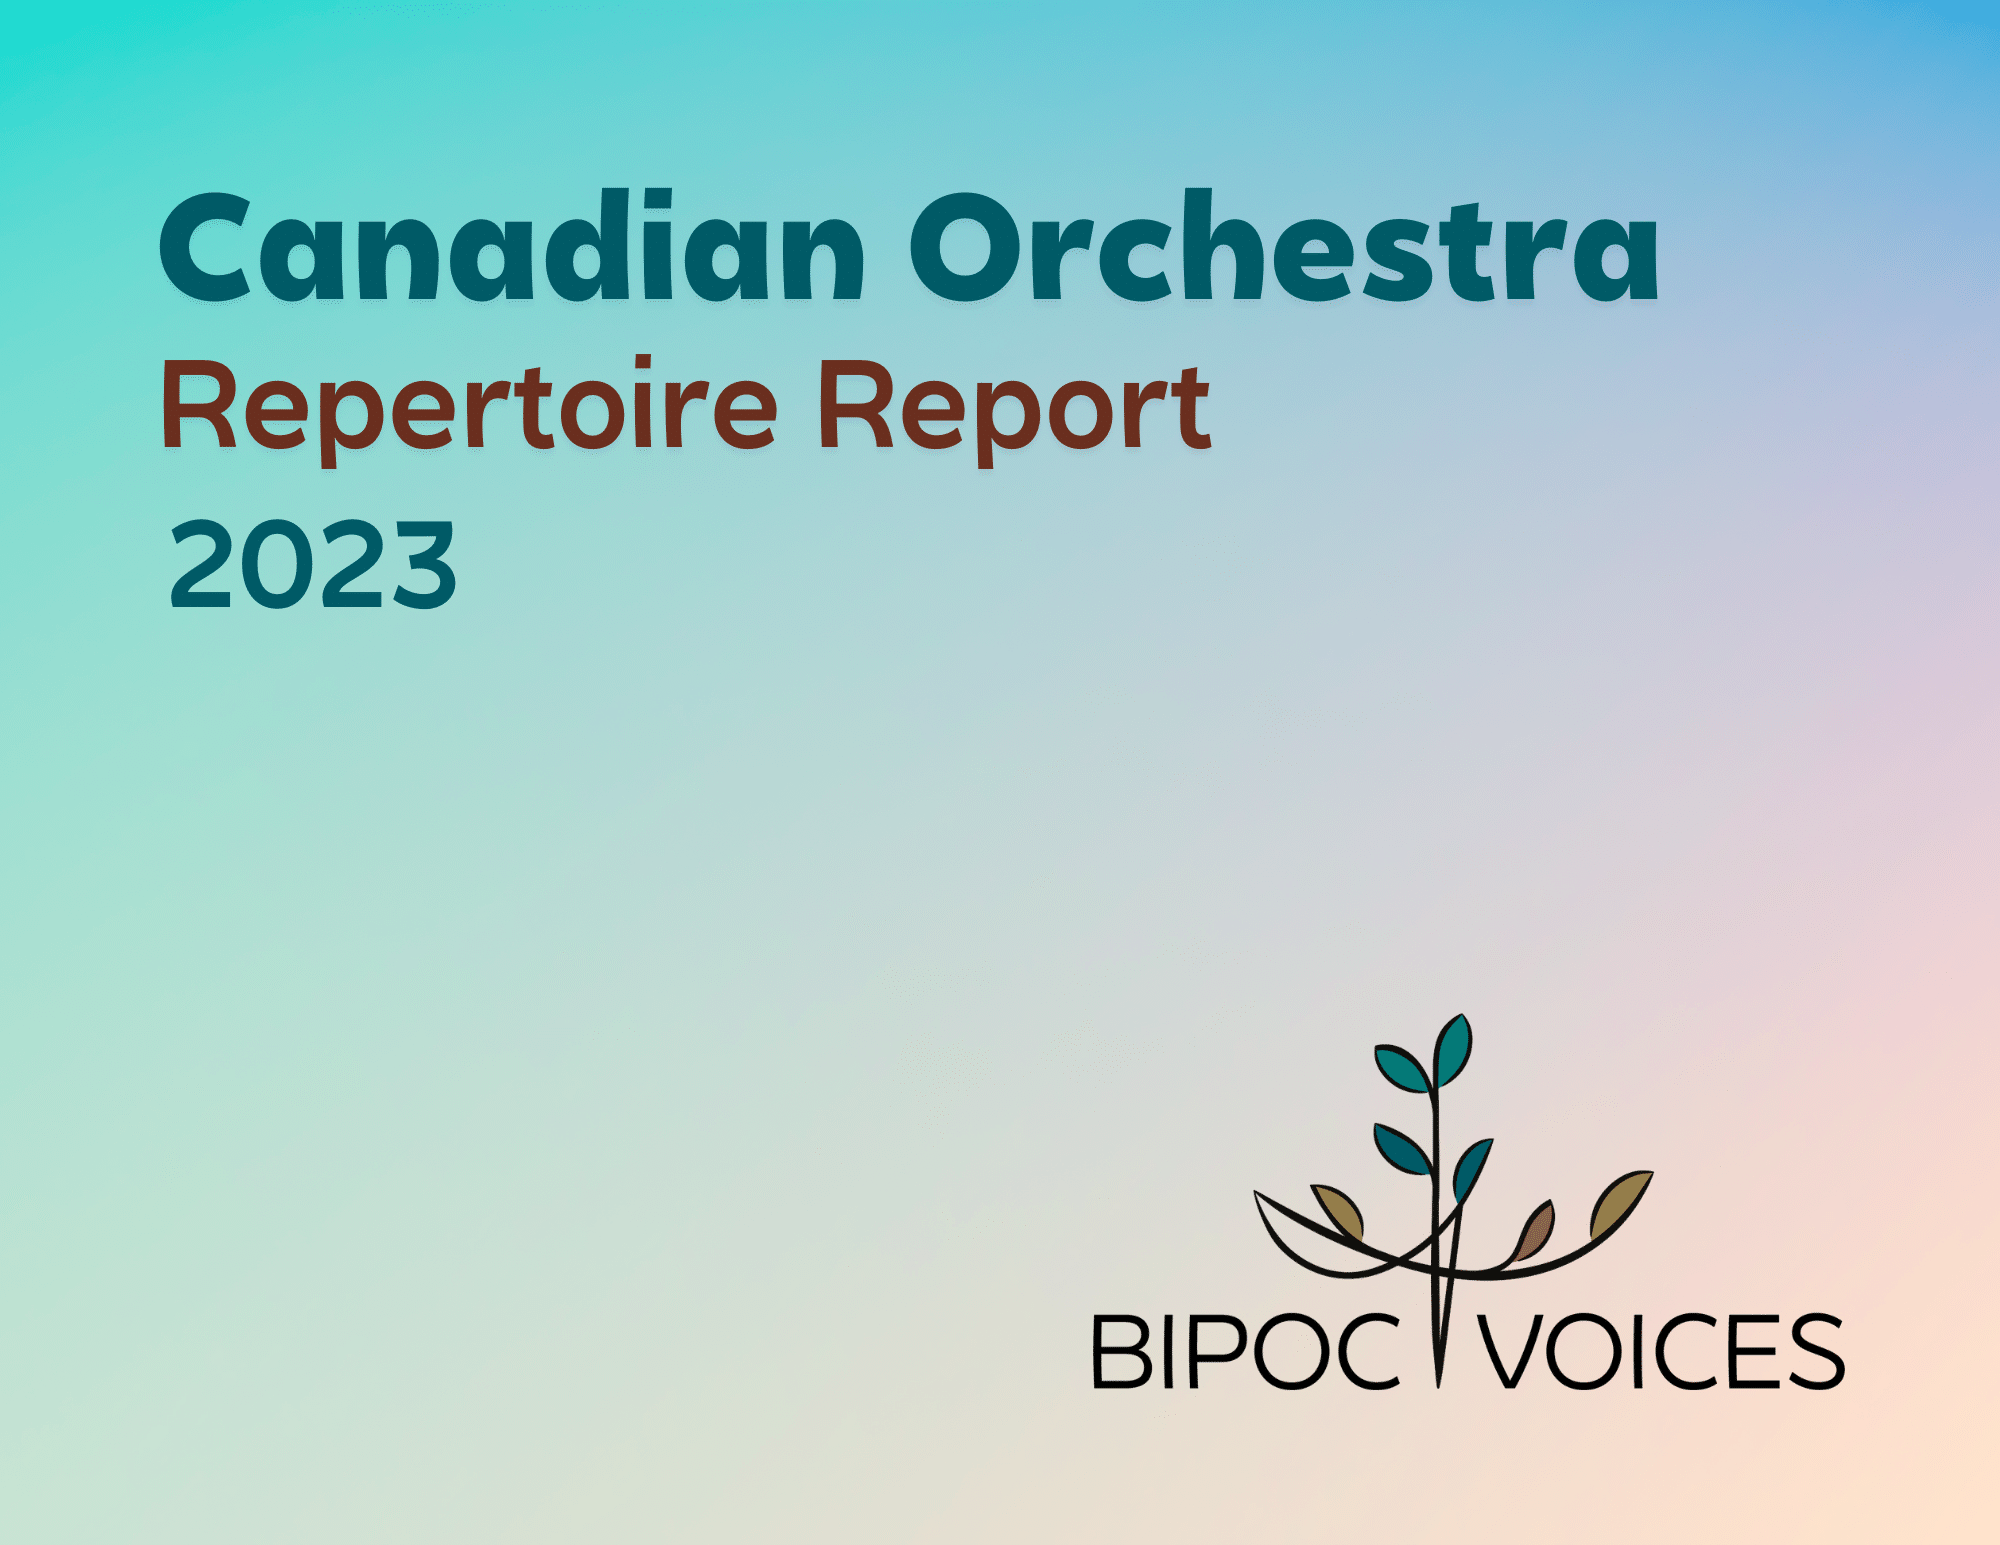 Link to download the repertoire report